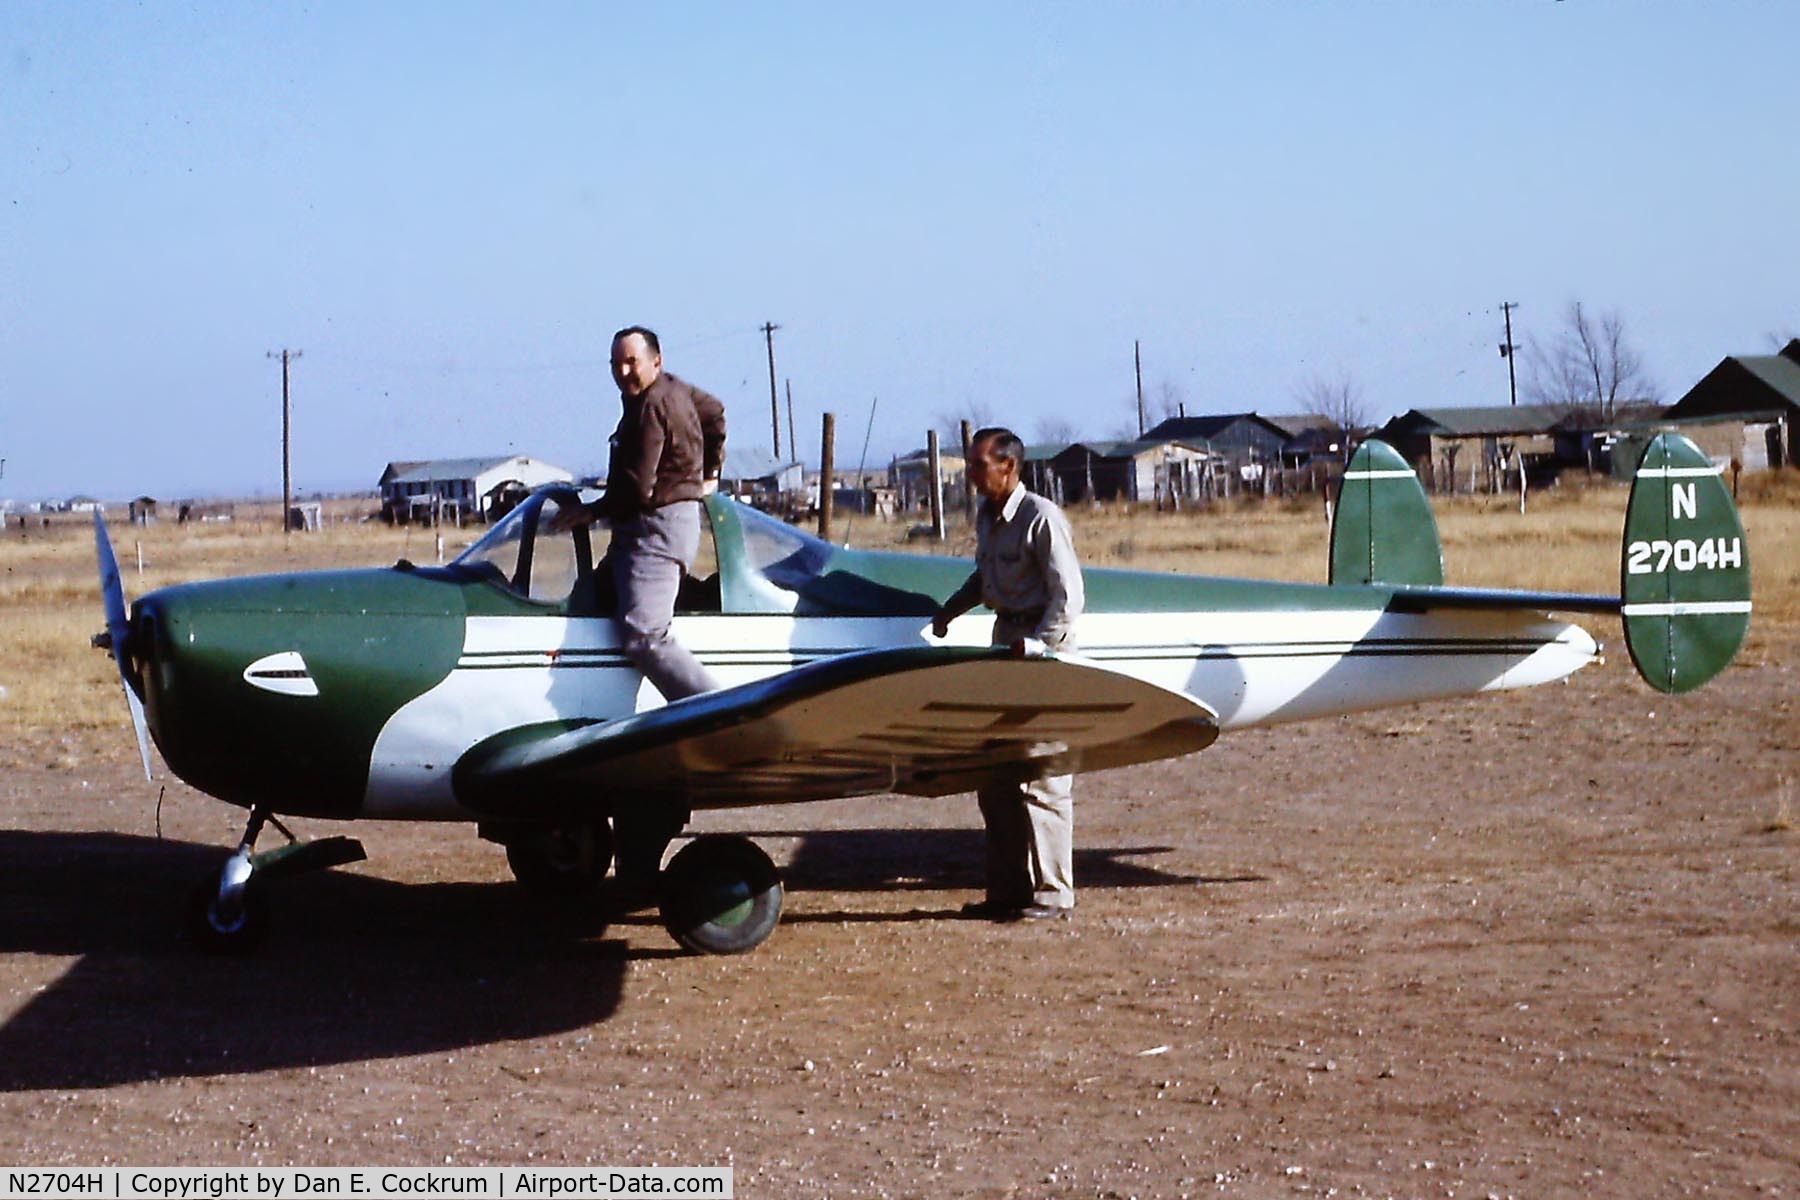 N2704H, 1946 Erco 415C Ercoupe C/N 3329, From color slide made in 1957 at Post, Texas.